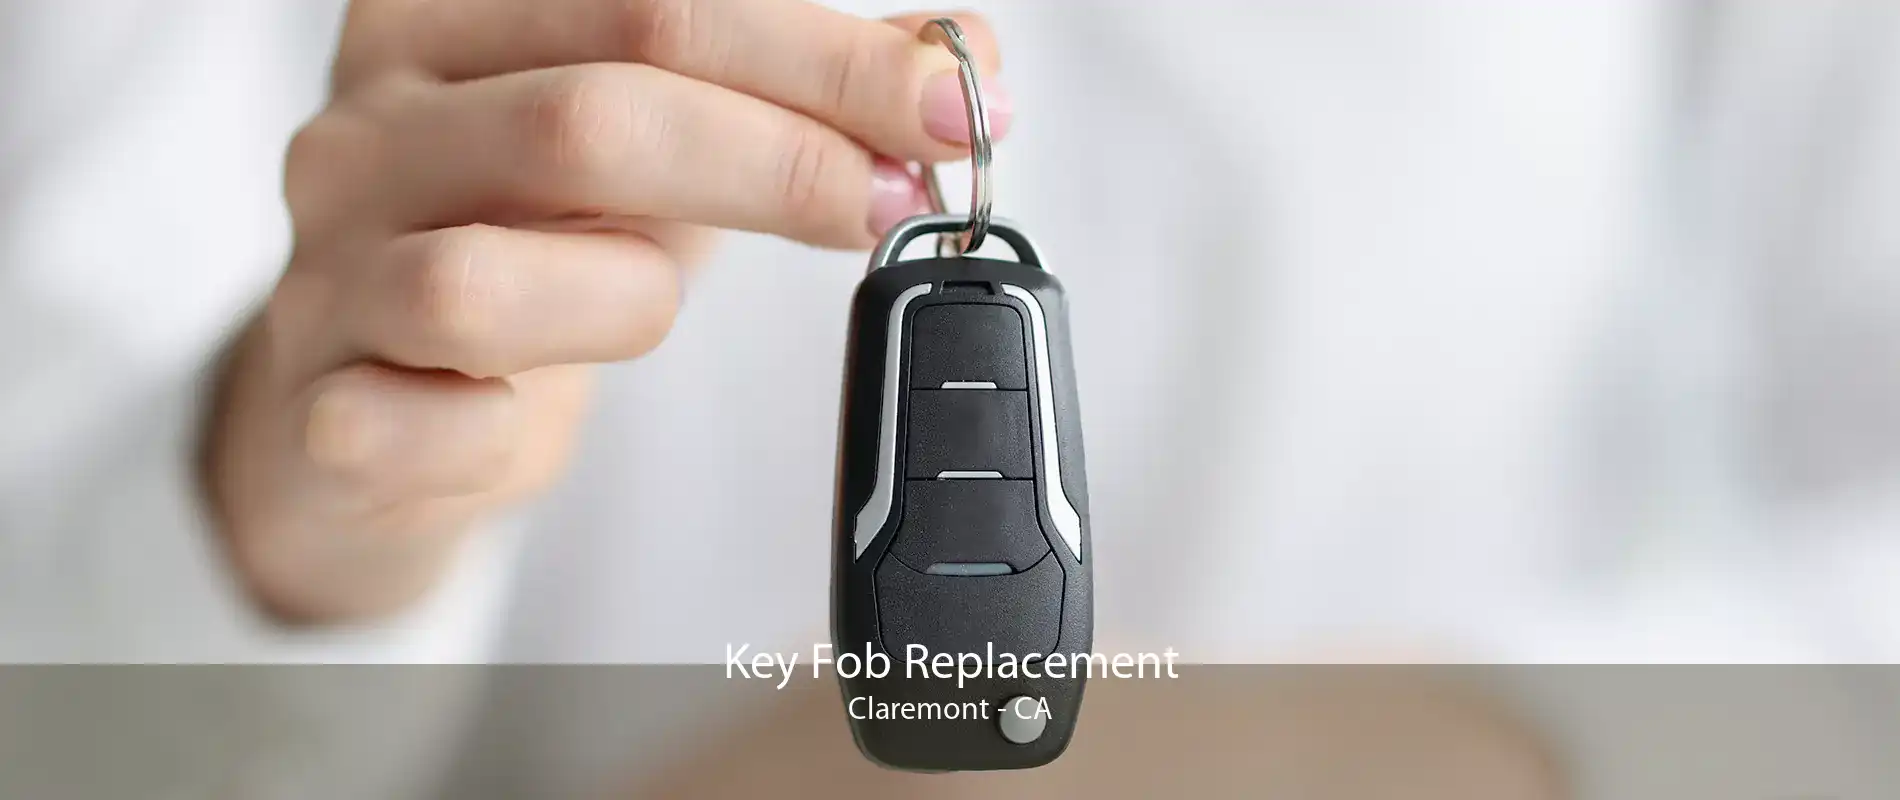 Key Fob Replacement Claremont - CA